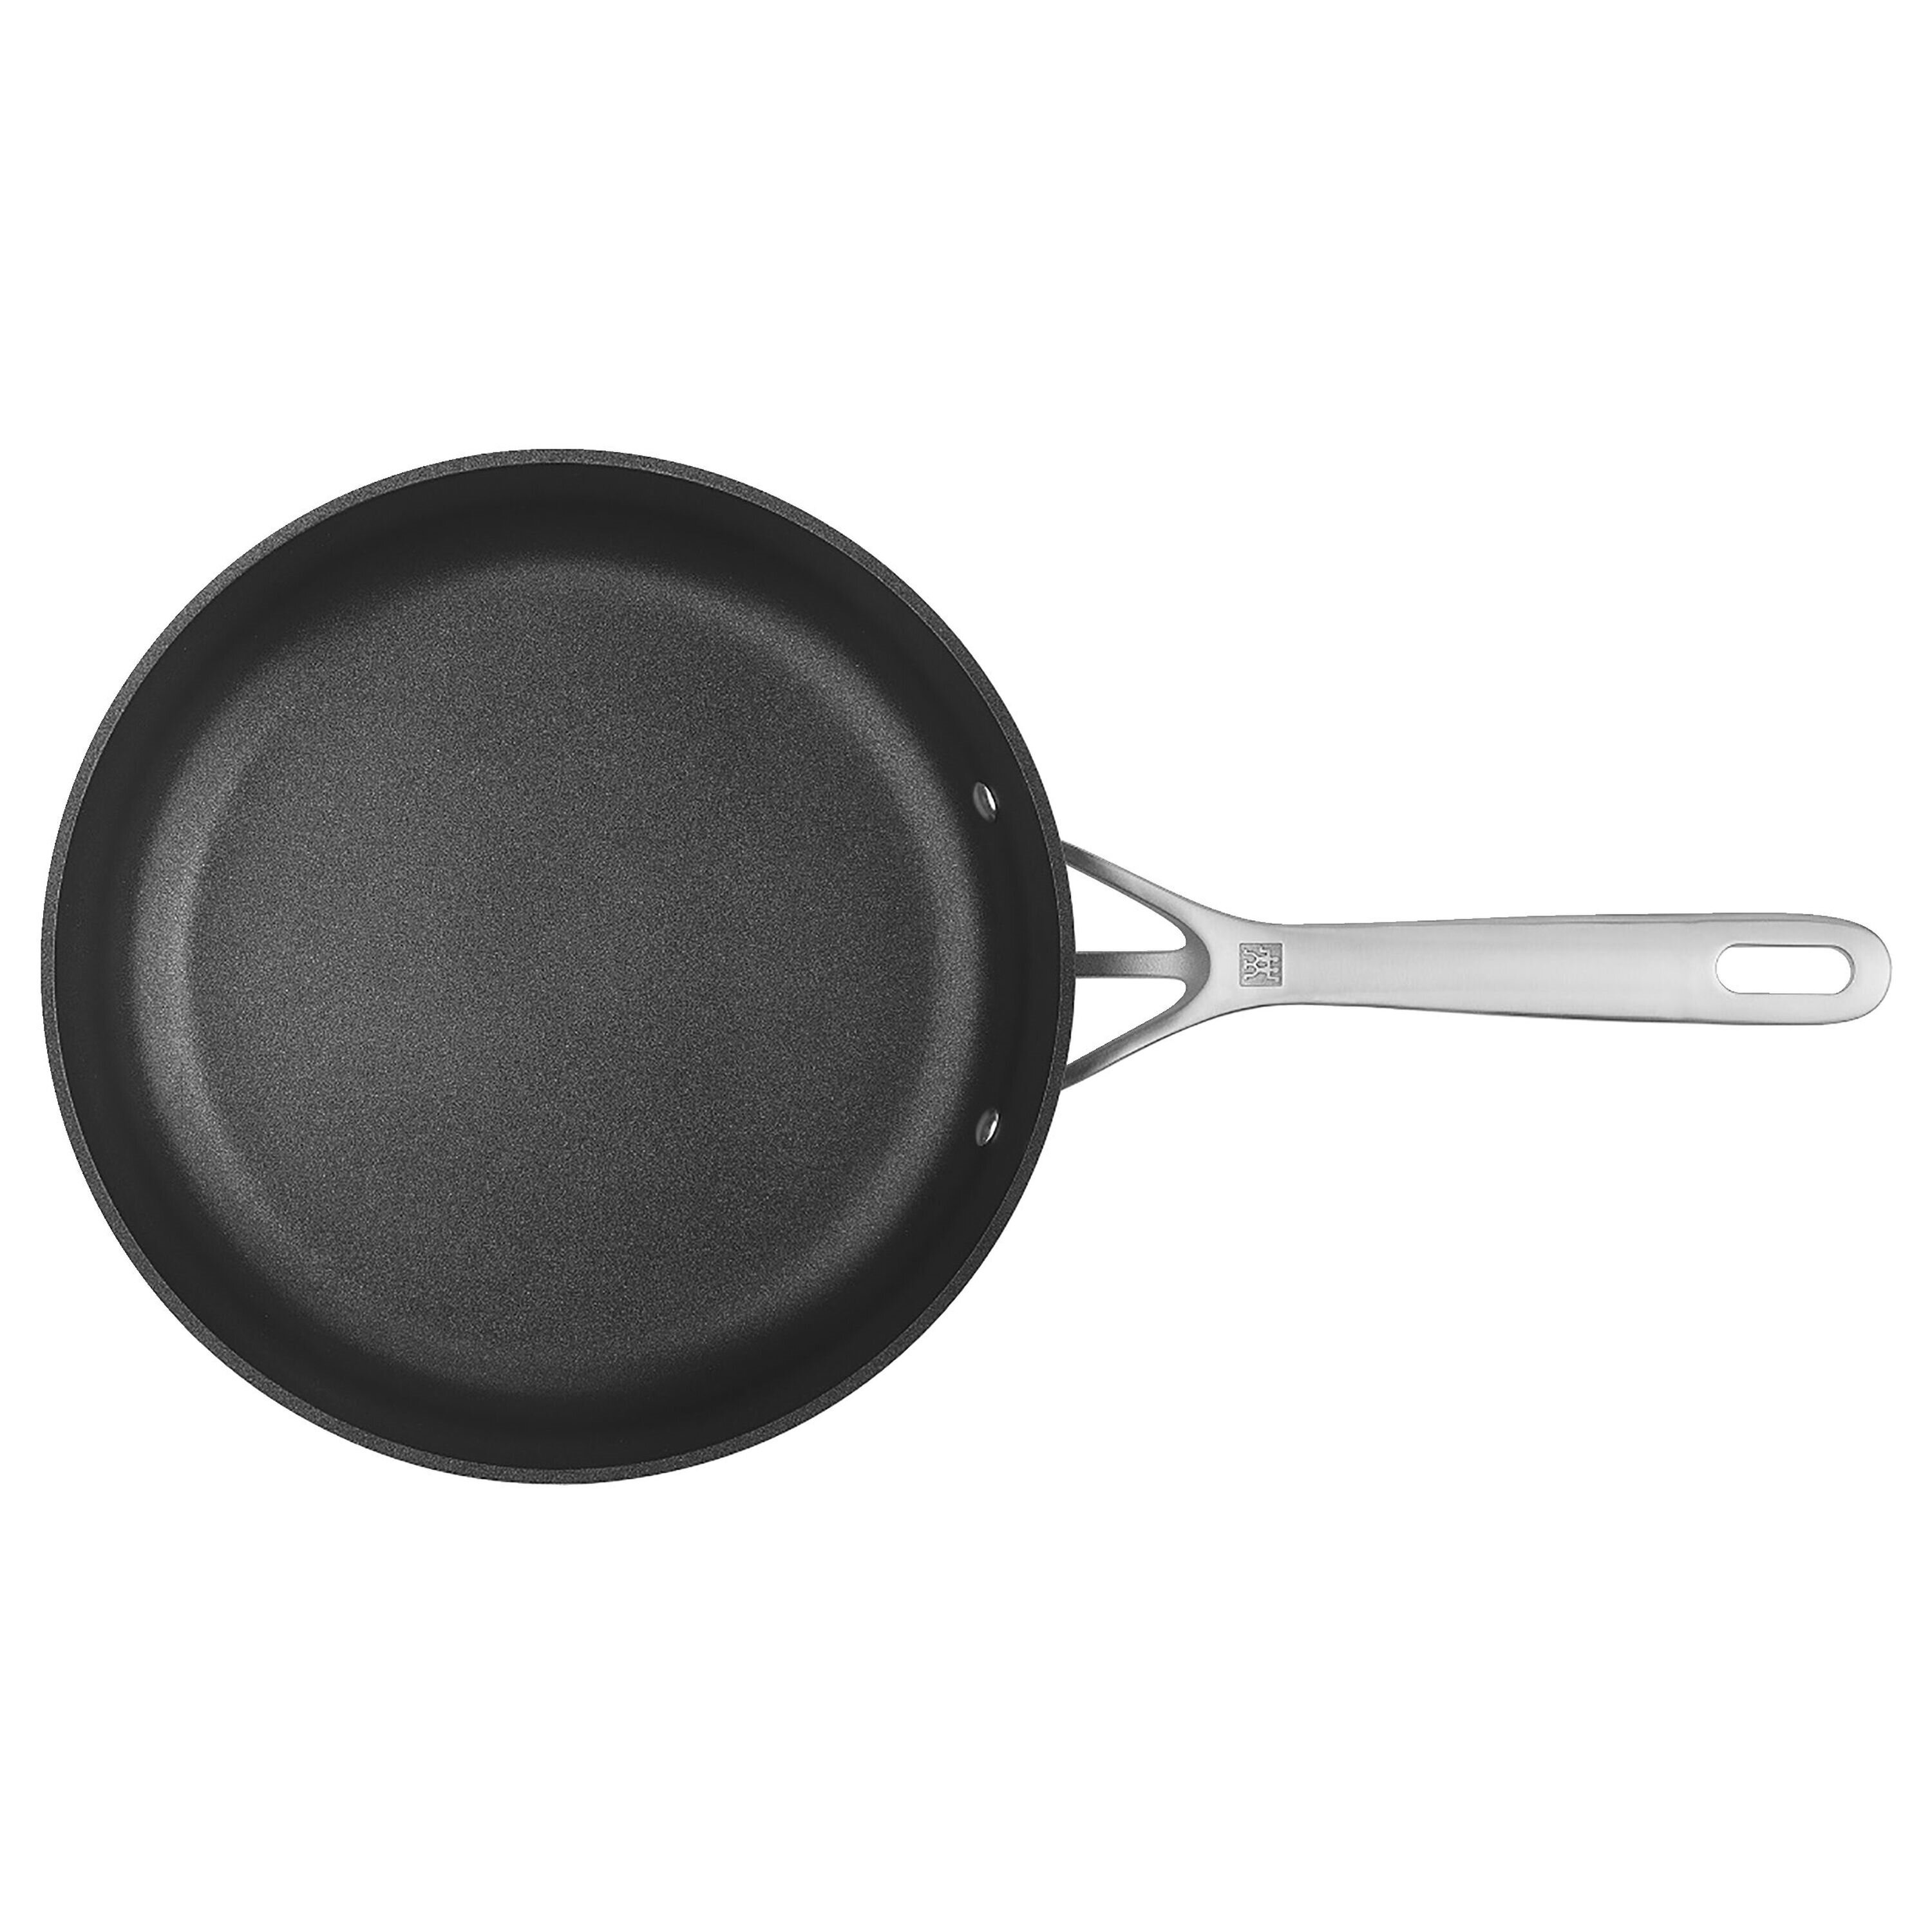 ZWILLING Vitale 10-inch Nonstick Frying Pan, Aluminum, Scratch Resistant,  Made in Italy